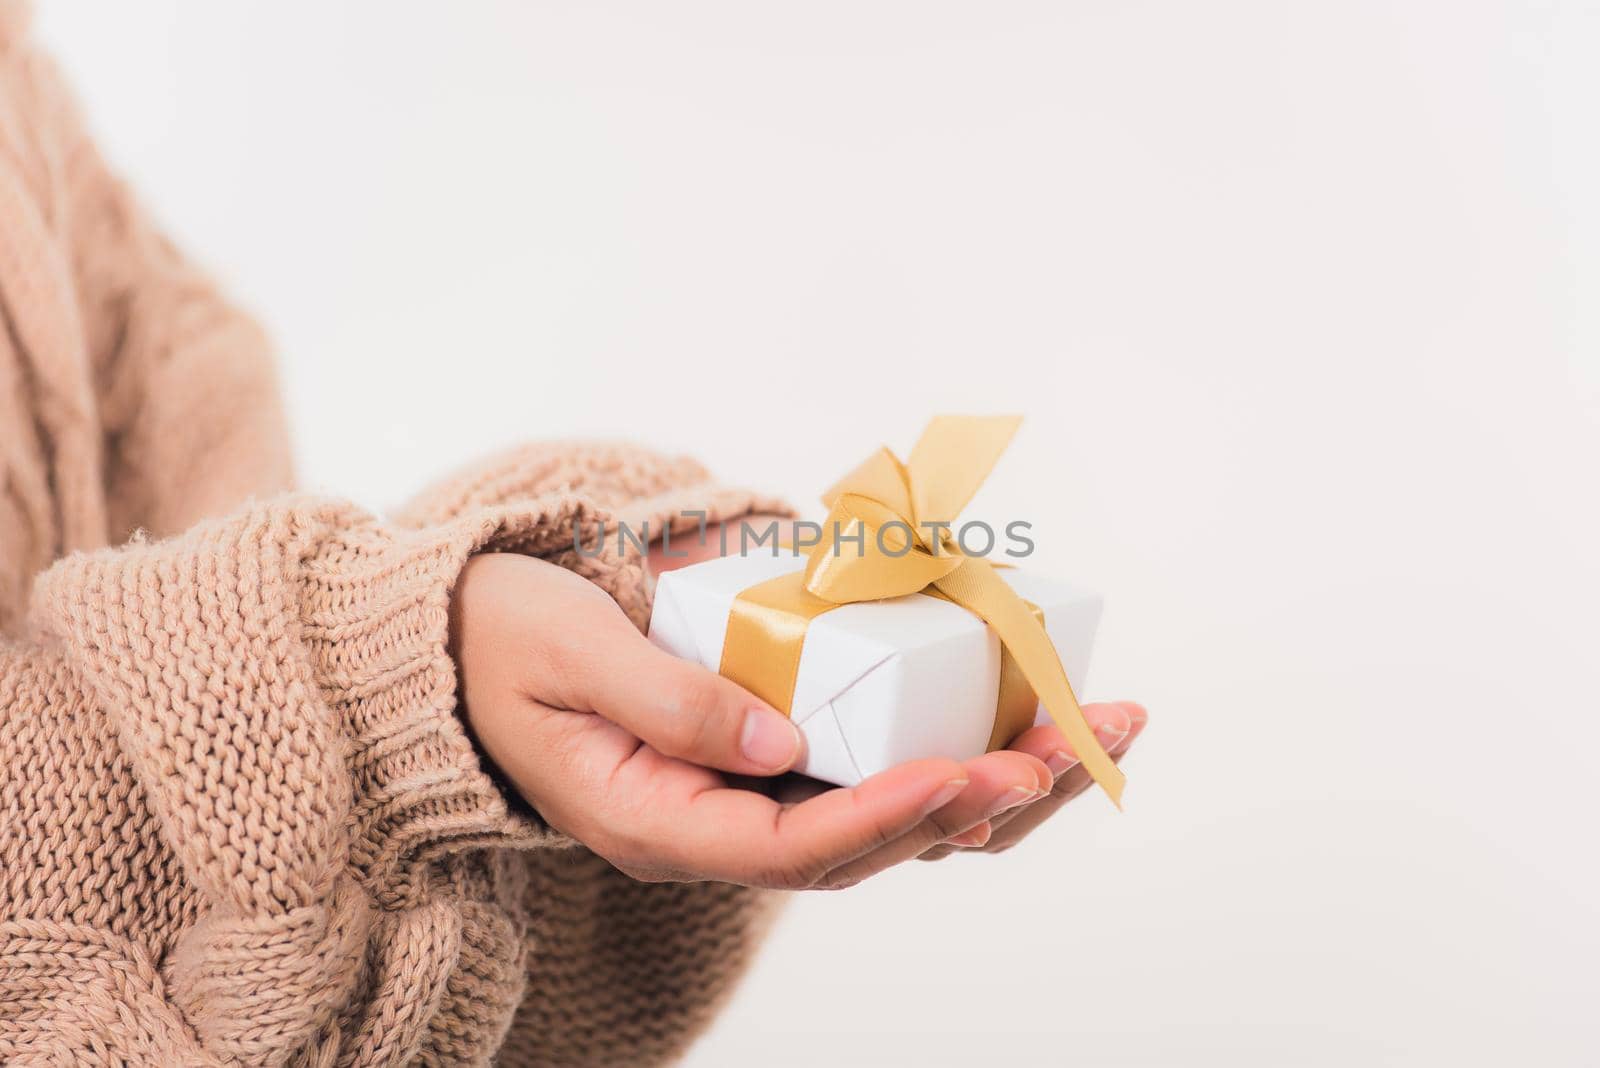 Valentine's Day. Woman beauty hands holding small gift package box present wrapped paper with ribbon isolated on white background, Birthday, New year, Christmas, holiday background concept